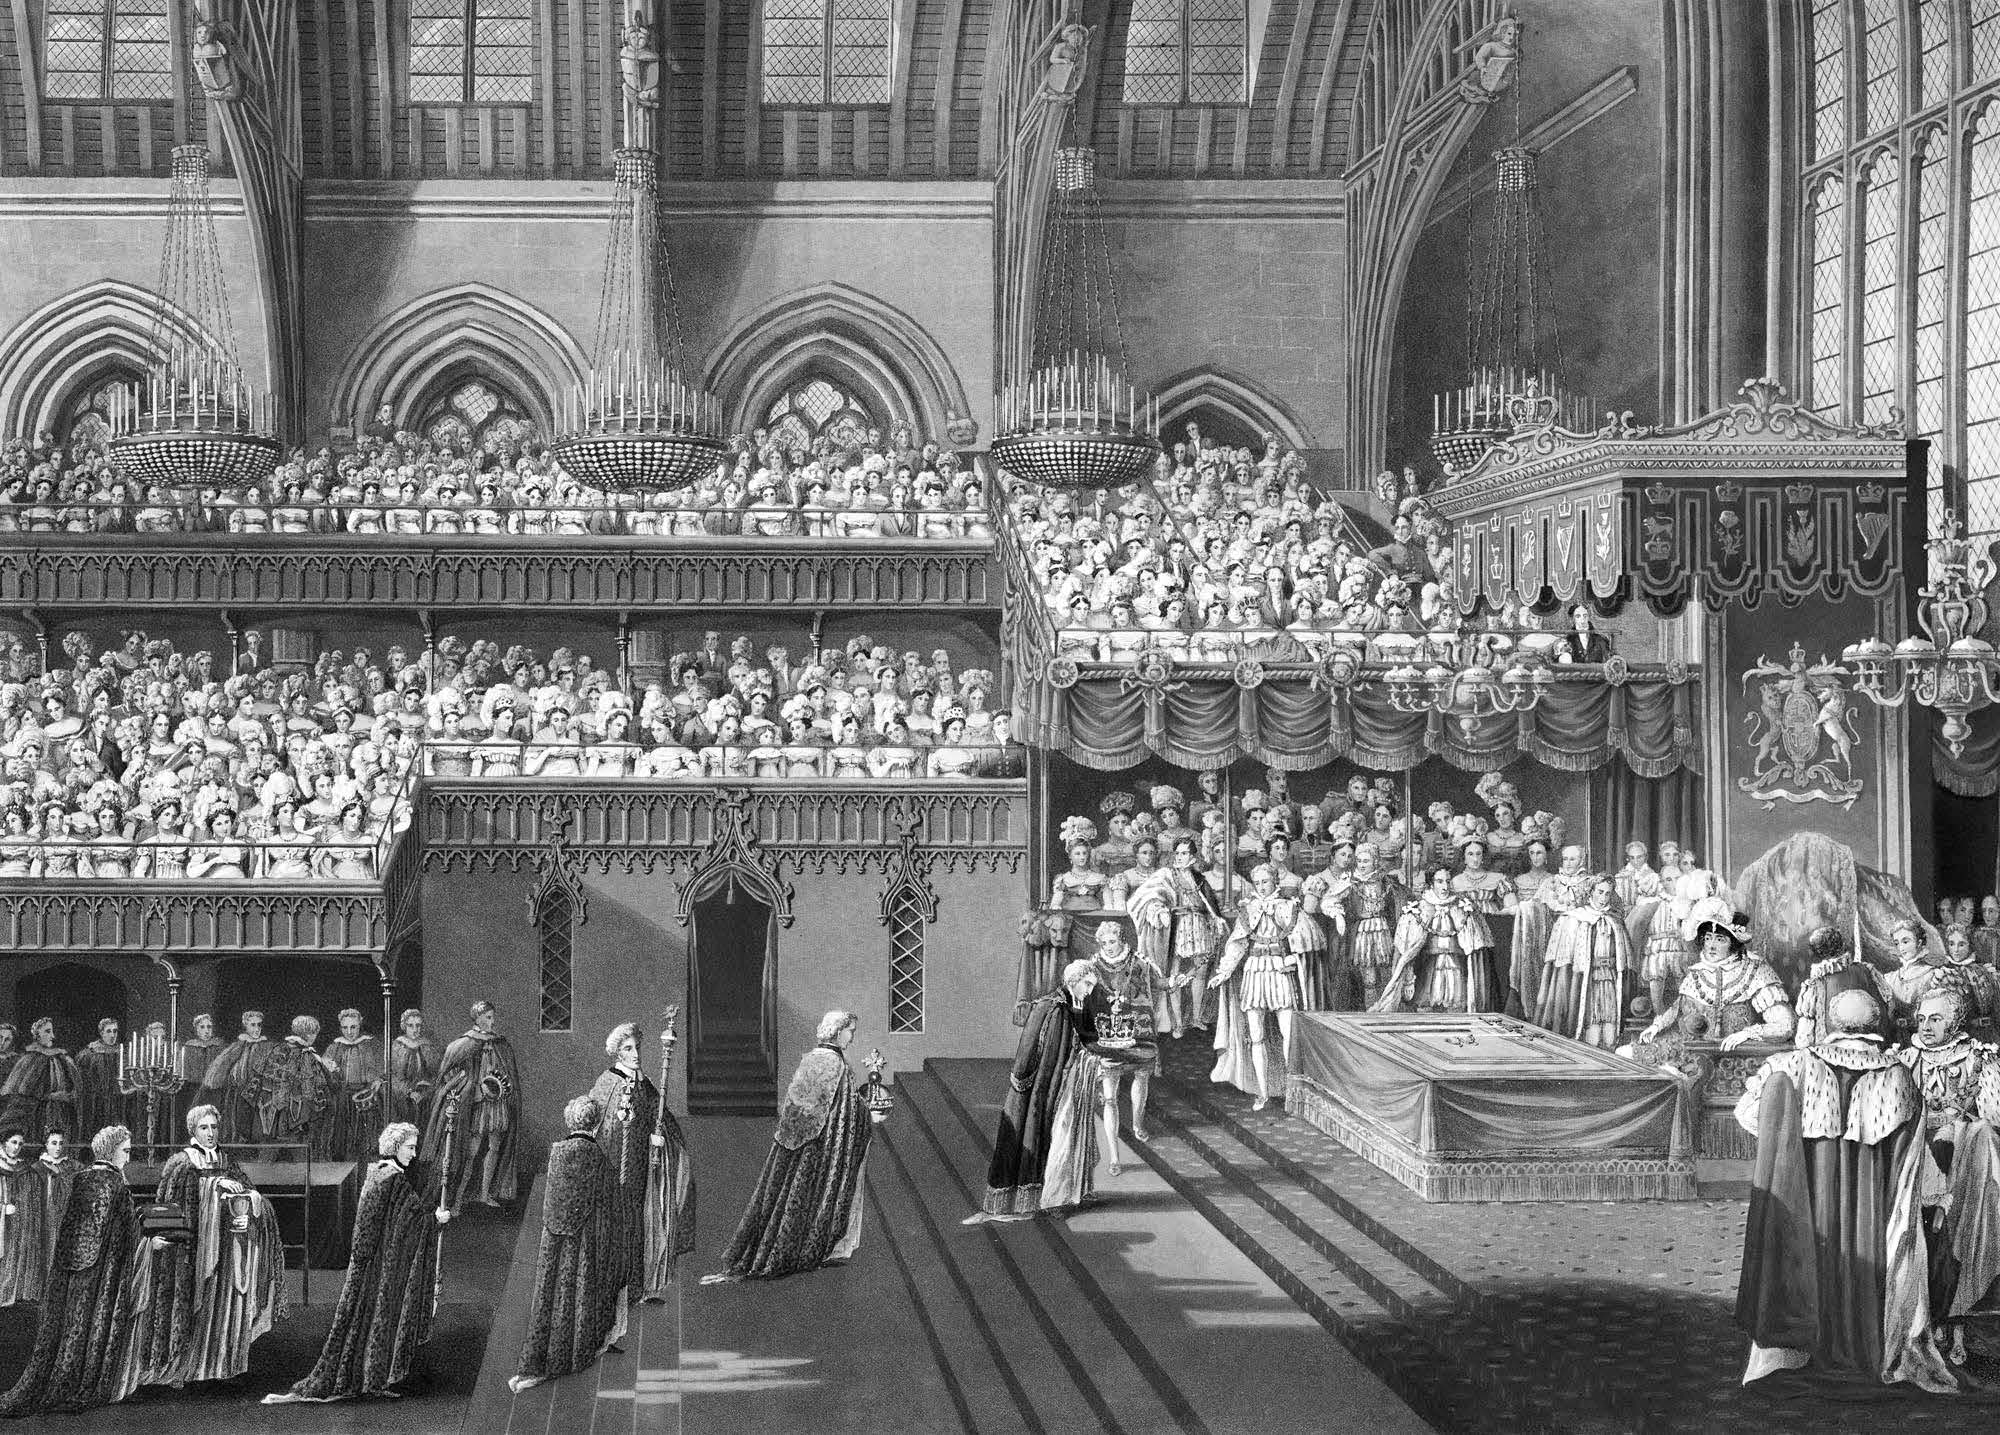 Coronation Banquet of King George IV of Great Britain, by Sir George Naylor, 19 July 1821.